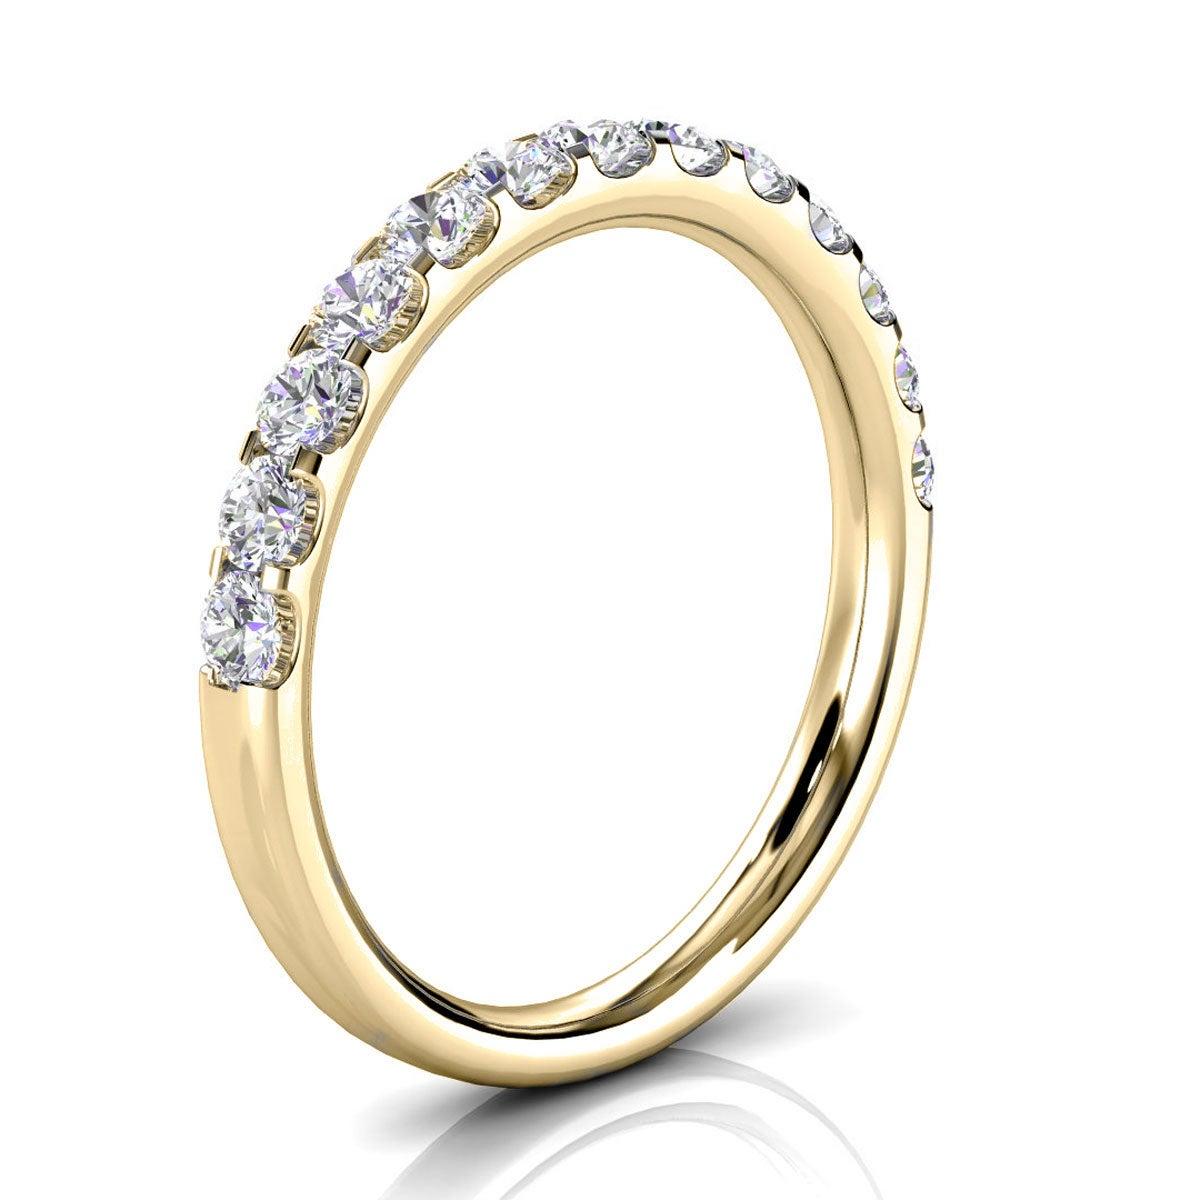 For Sale:  14K Yellow Gold Valerie Micro-Prong Diamond Ring '1/2 Ct. tw' 2